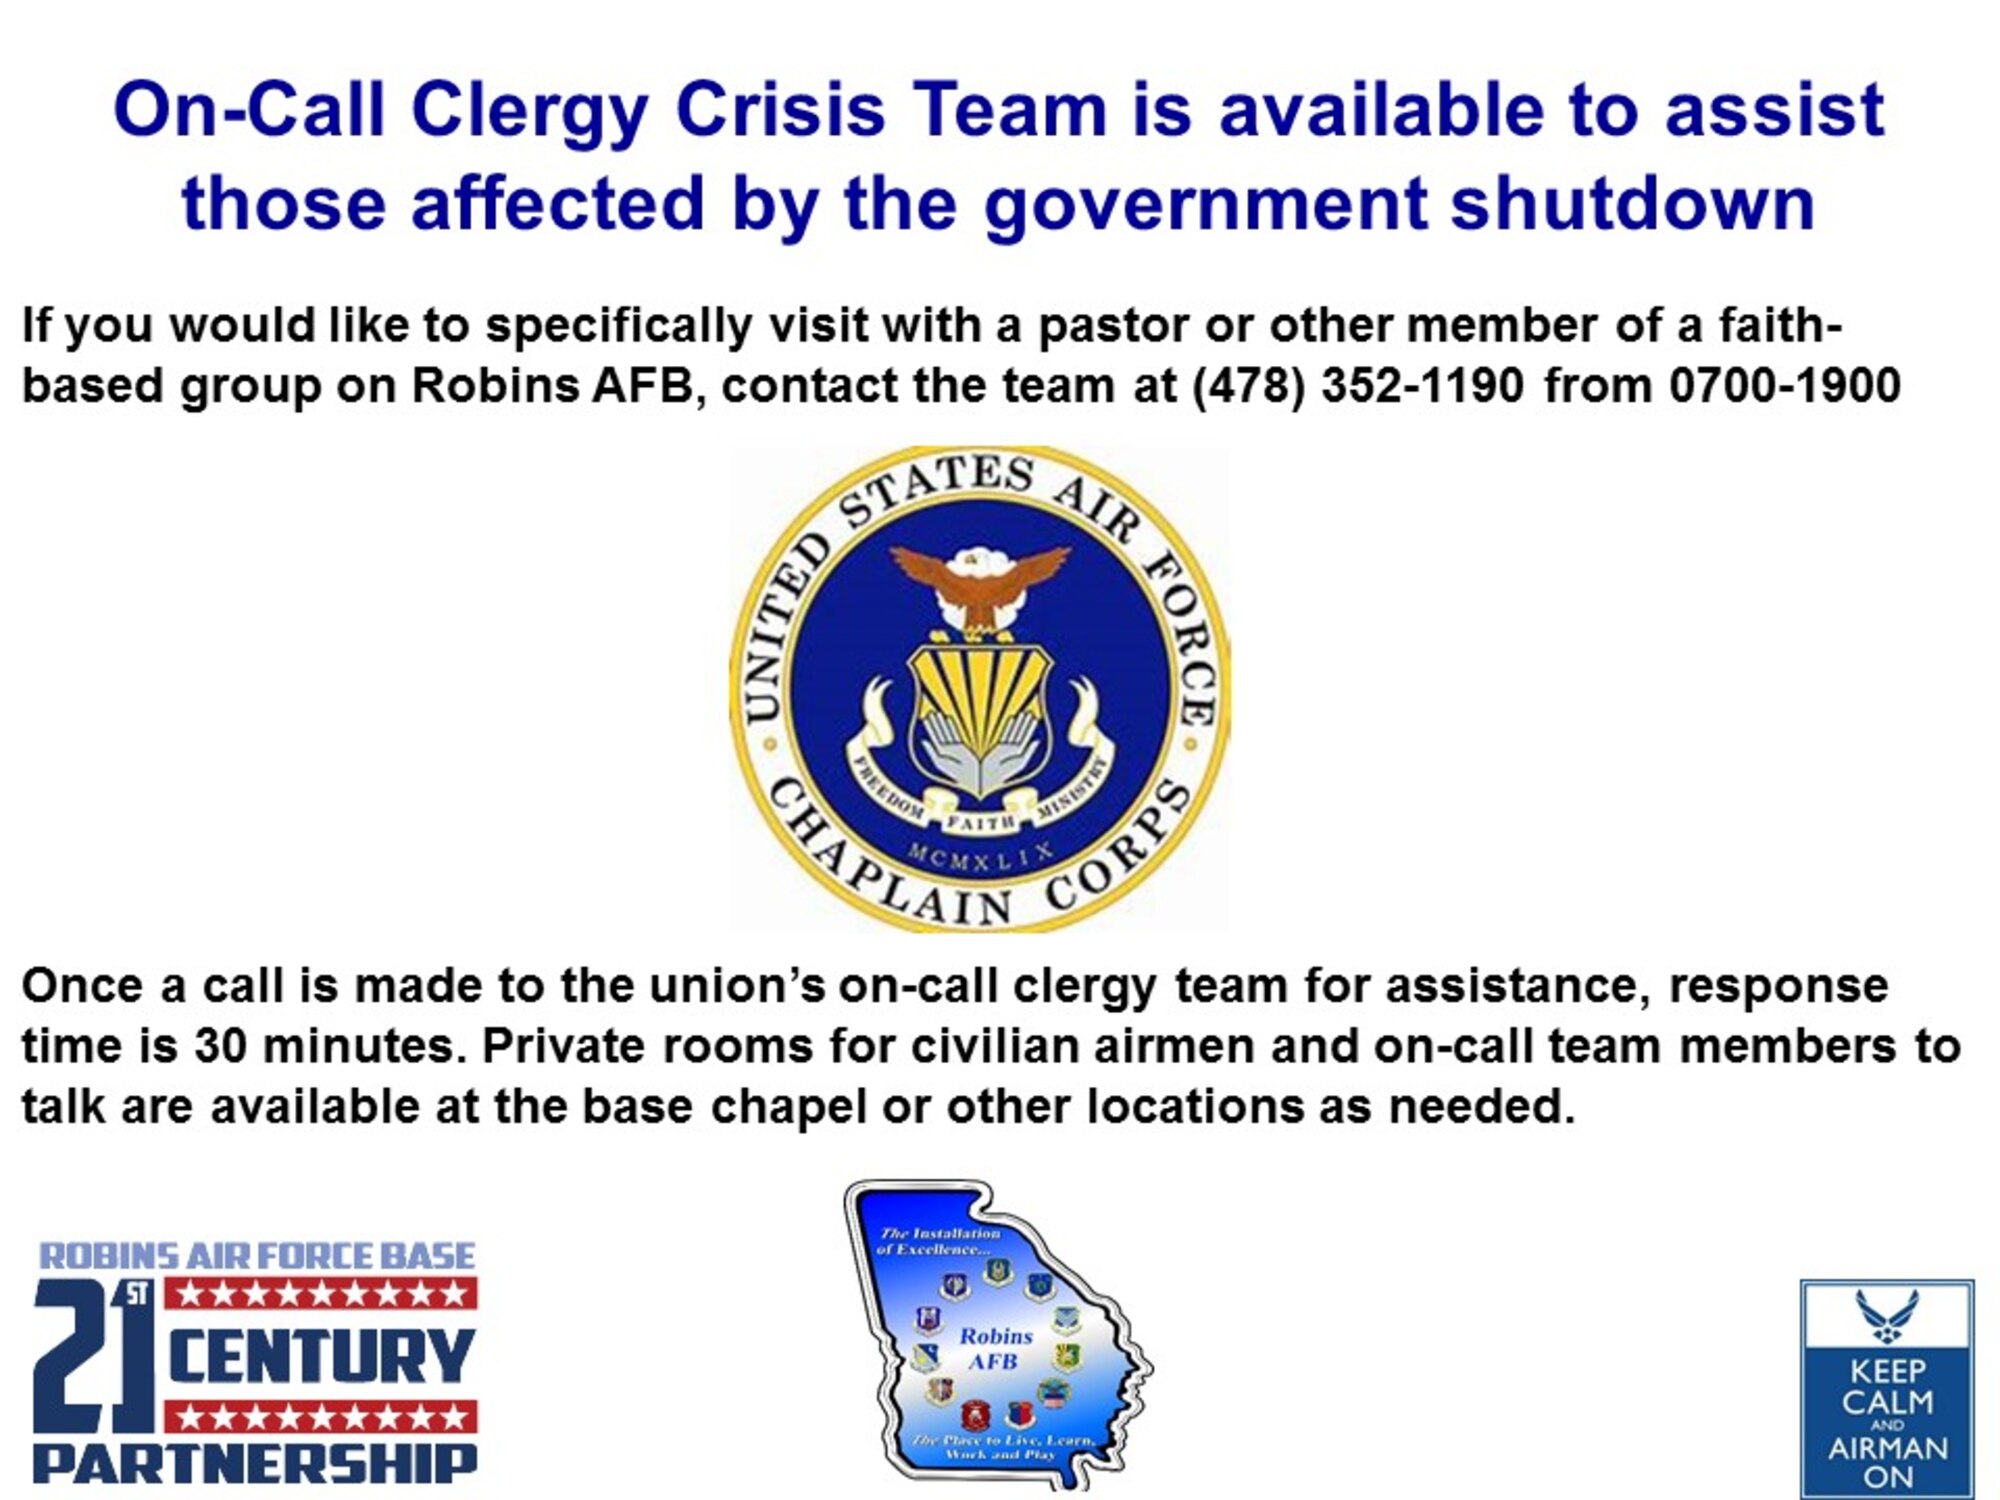 The on-call Clergy Crisis Team is available to assist those affected by the government shutdown. (U.S. Air Force graphic)